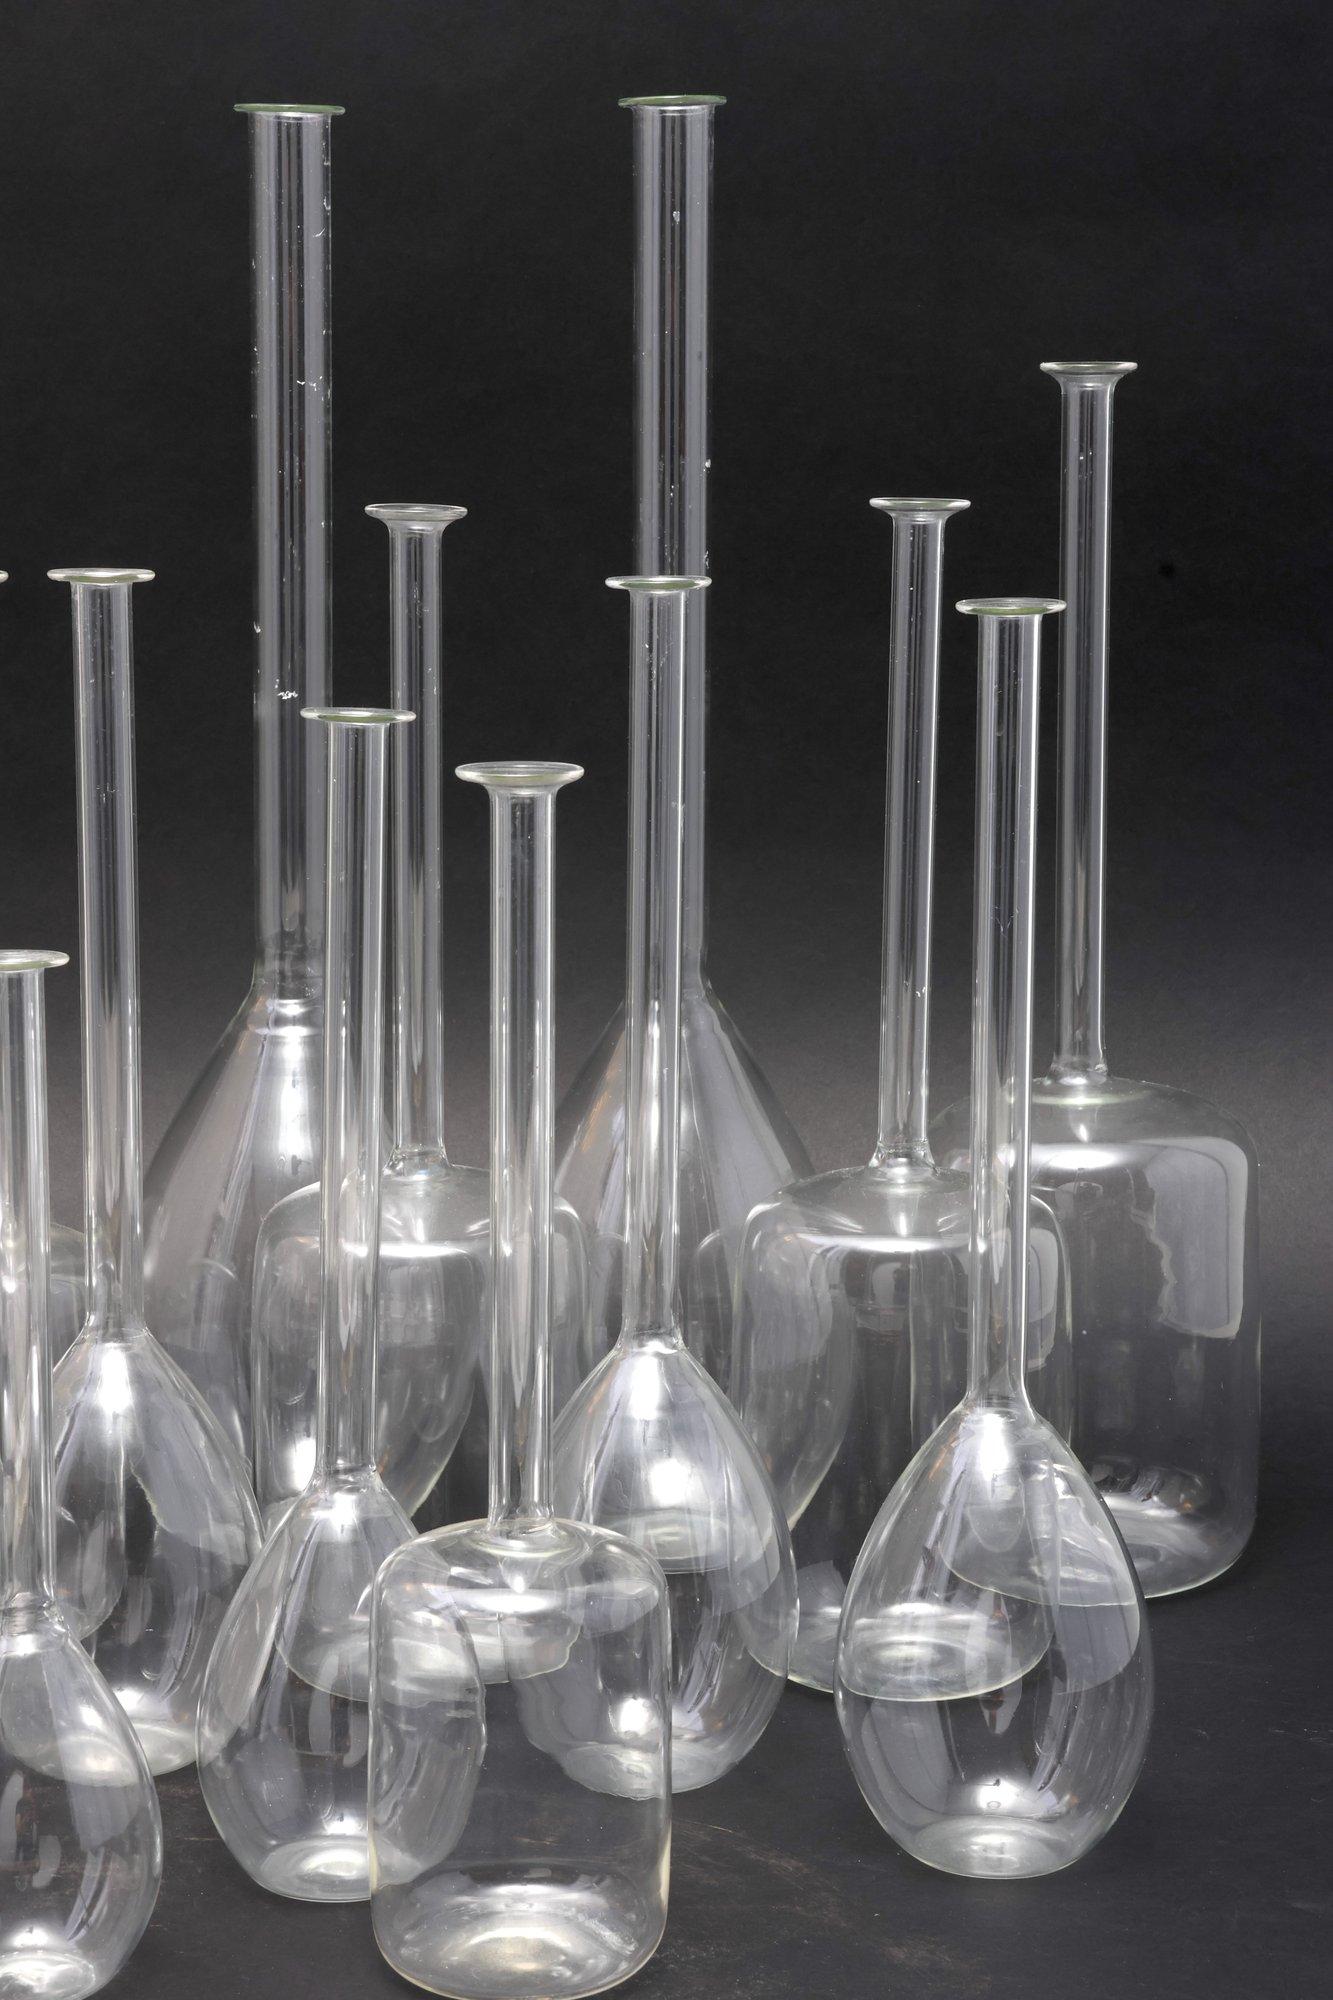 Collection Of 22 Glass Beaker Vases